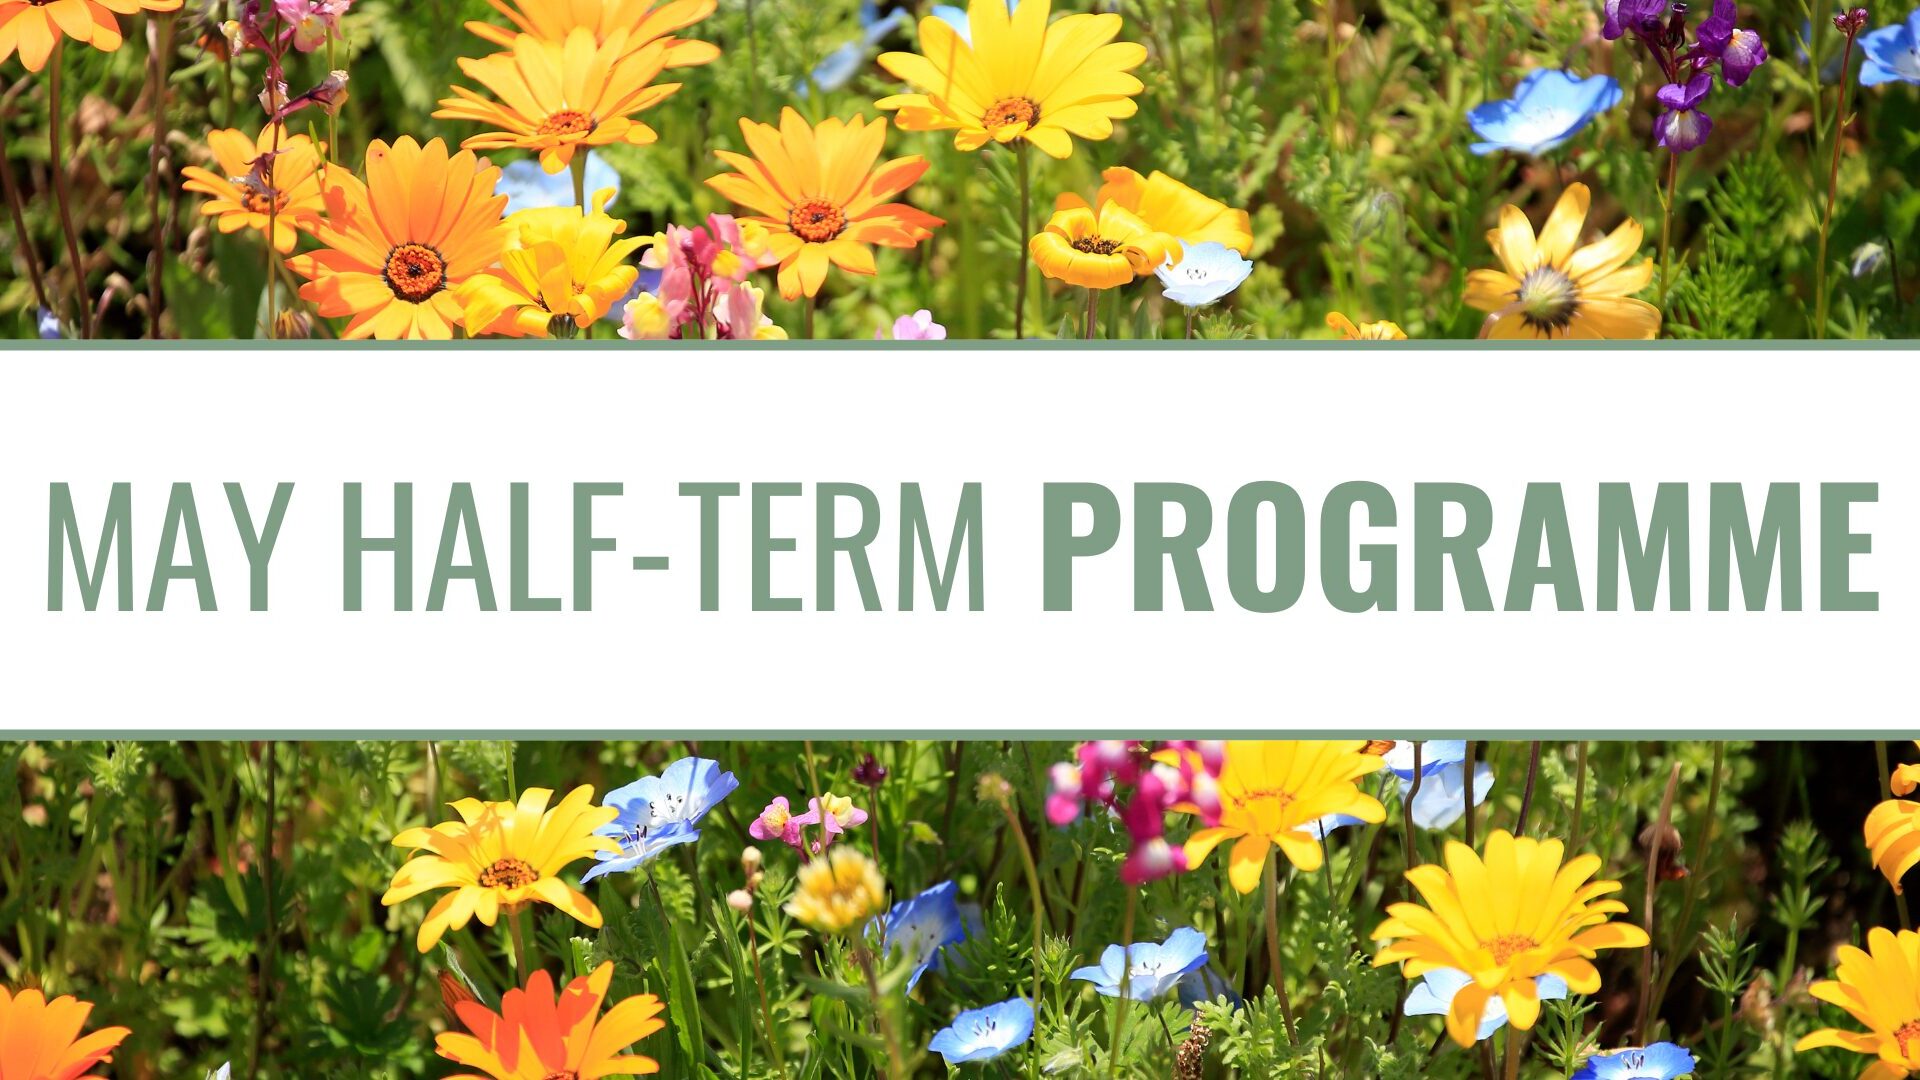 May half term website banner with flowers in the background.